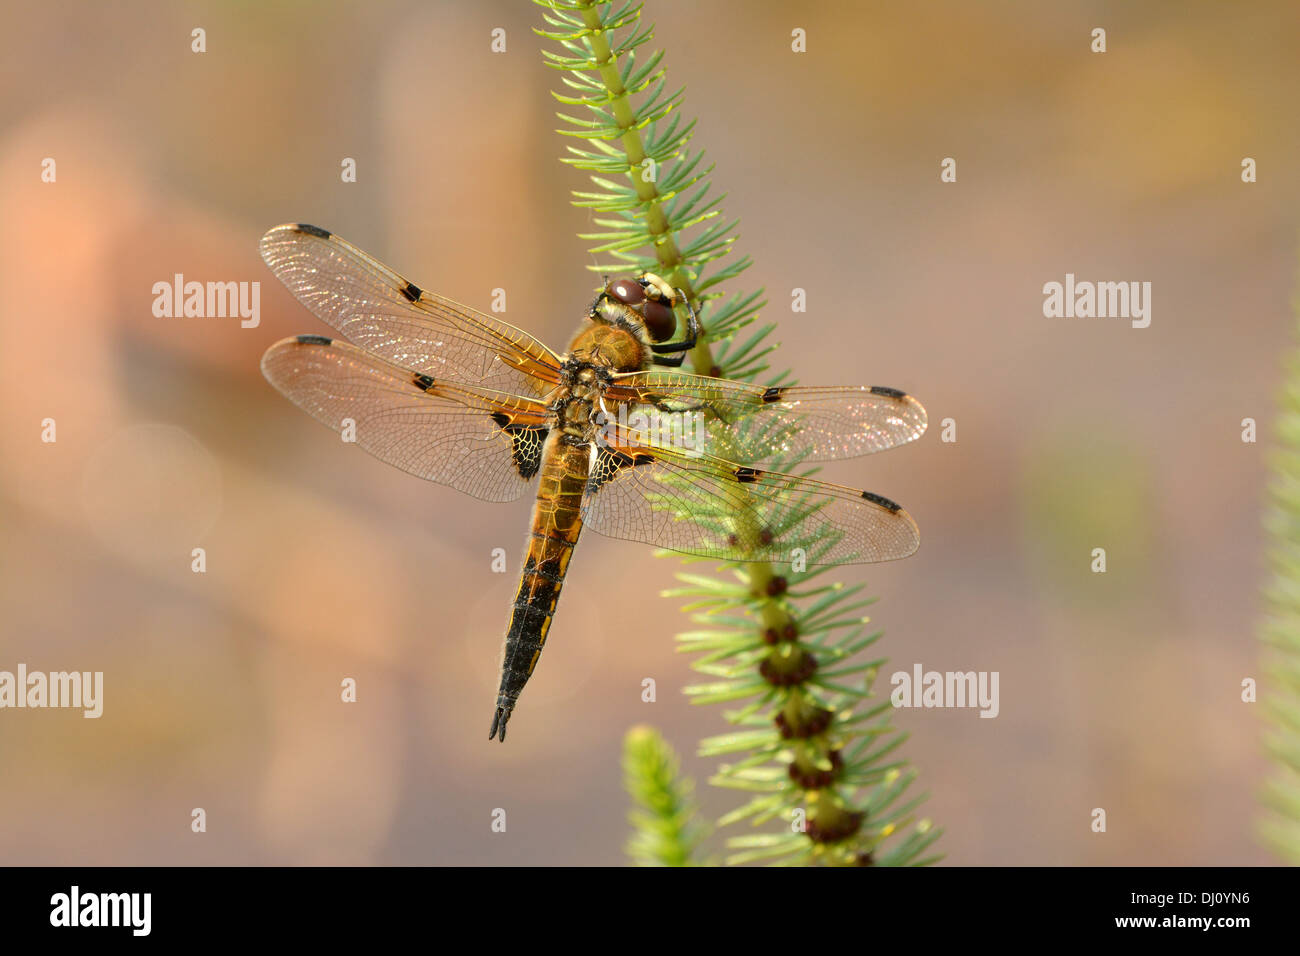 Four-spotted Chaser Dragonfly (Libellula quadrimaculata) adulte au repos, Oxfordshire, Angleterre, juillet Banque D'Images